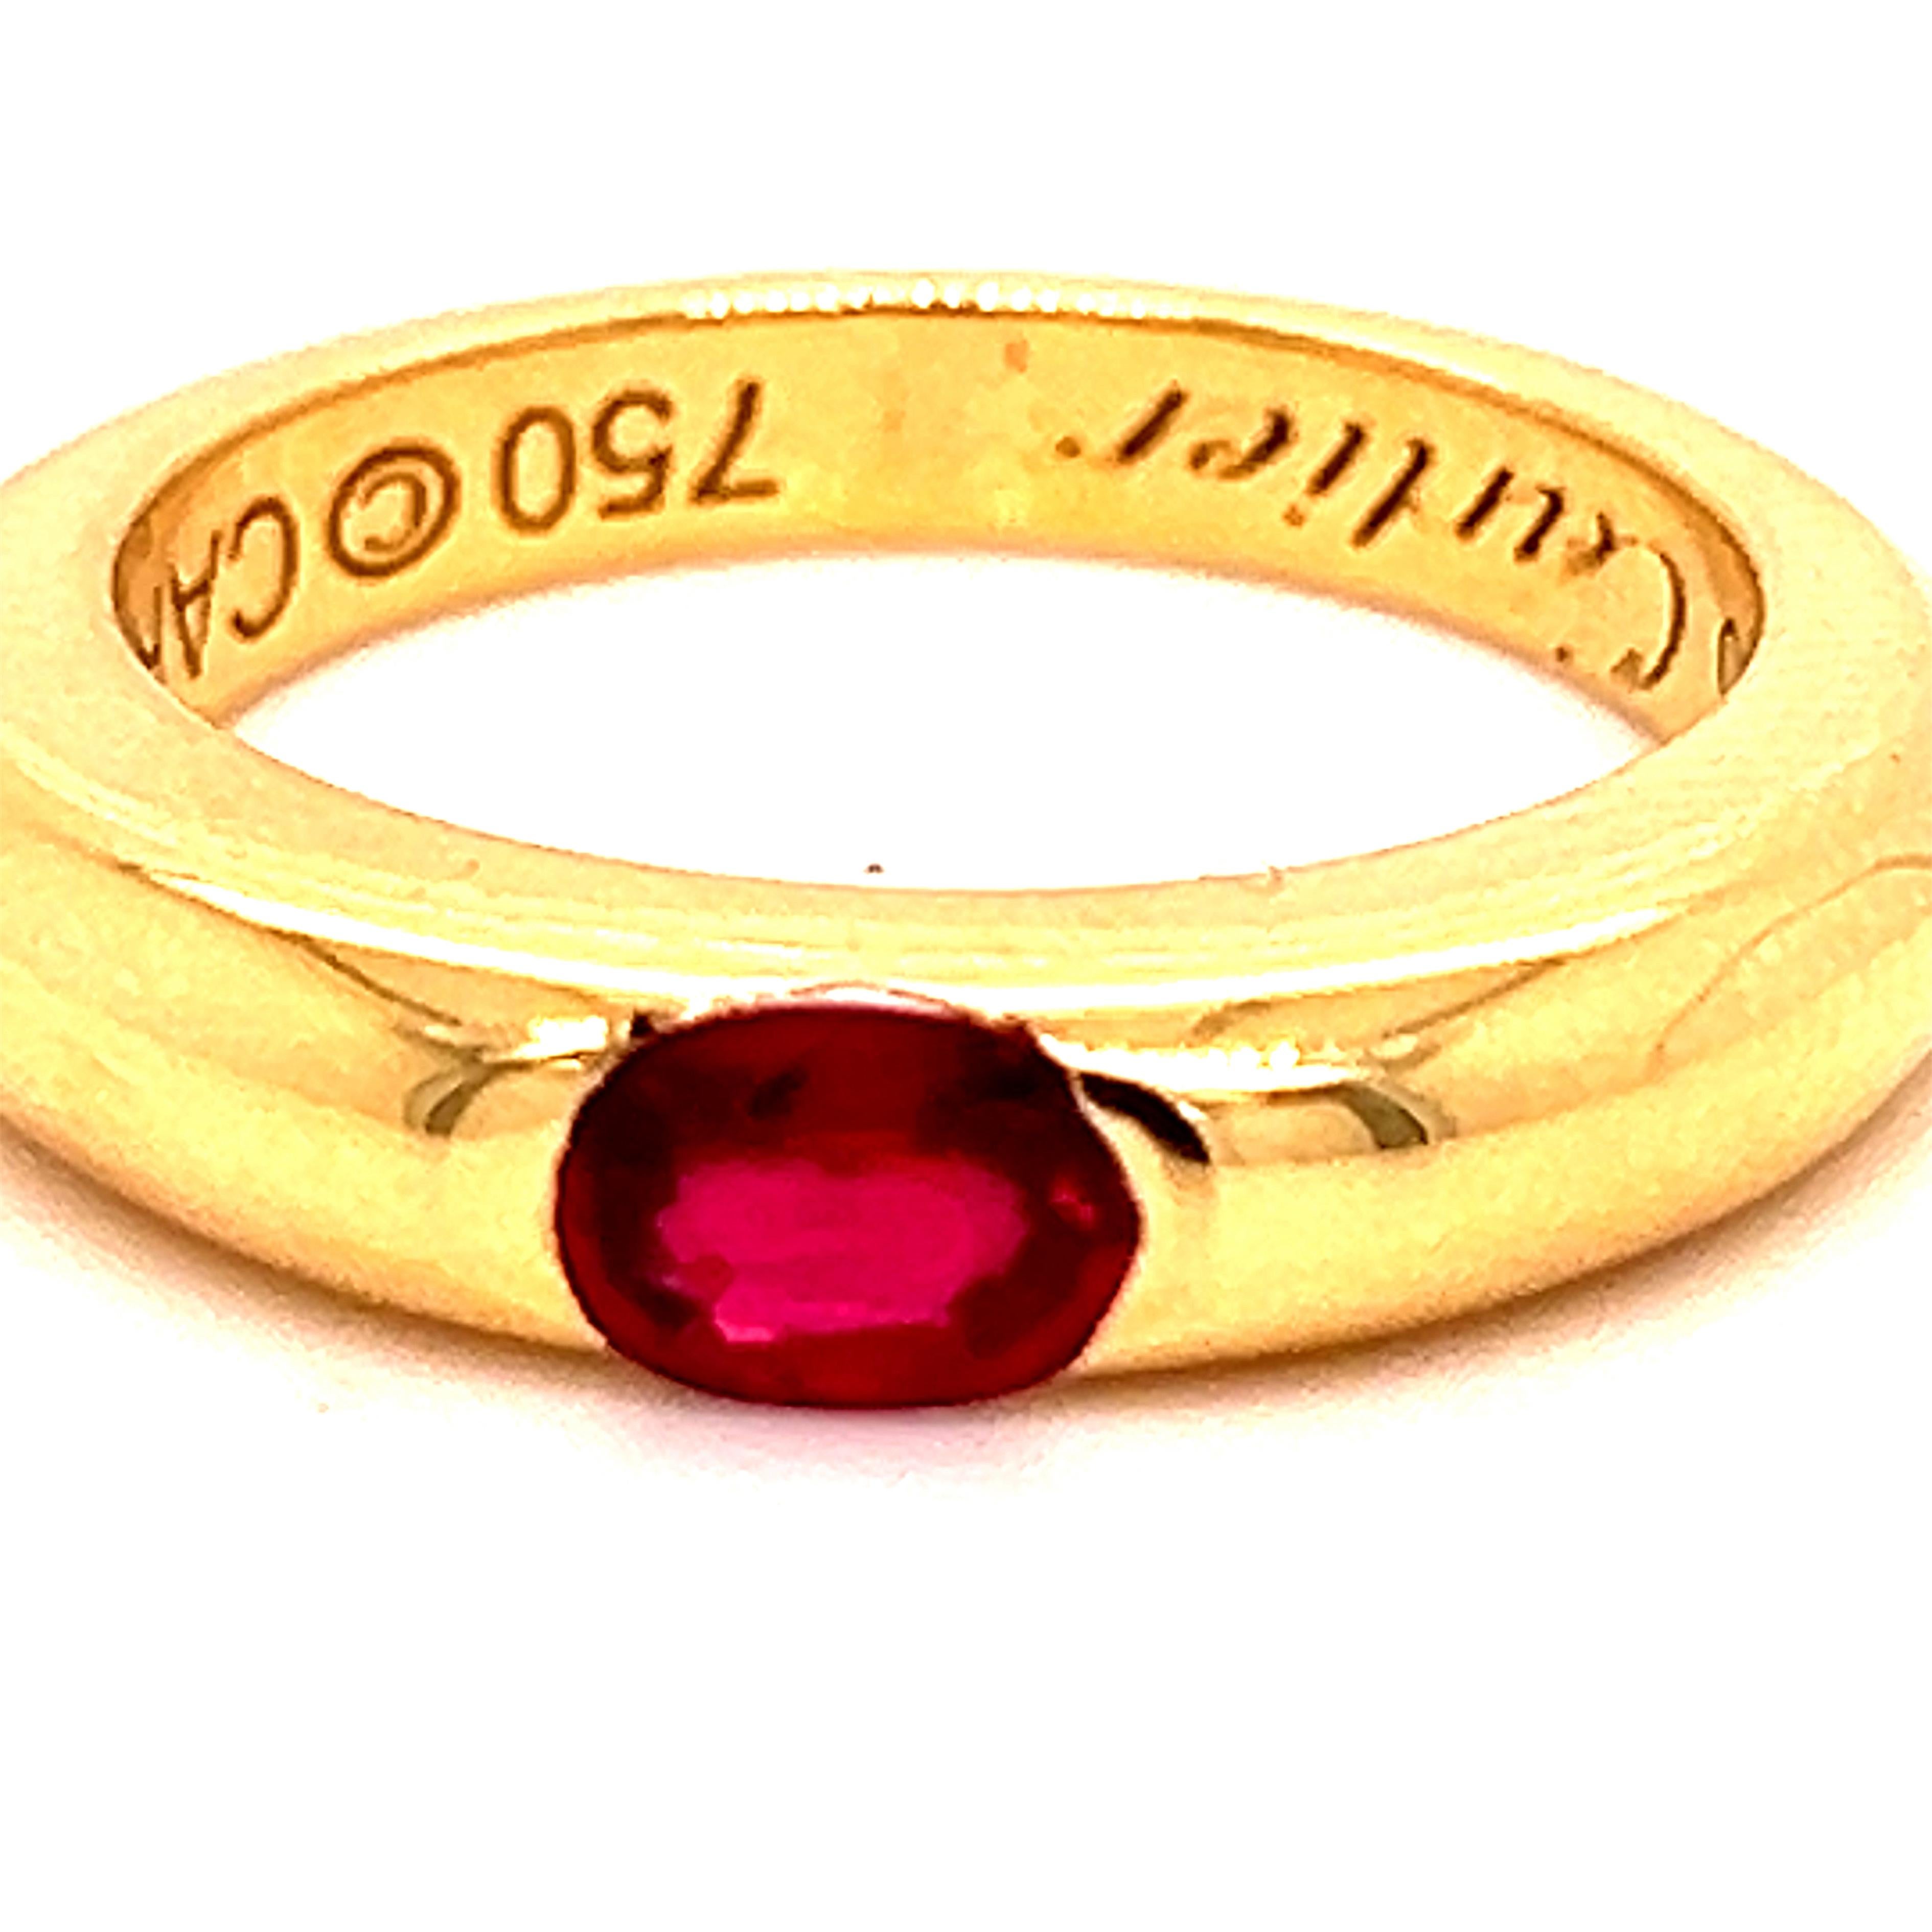 Original 1992, Cartier Oval Red Ruby 18Kt Yellow Gold iconic Ellipse ring, French size 52, Us Size 6.
A very precious Cartier circa 0.60KT Top Quality Oval Red Ruby in a simple, all time wearable 18kt yellow gold setting timeless ring . 
Brimming